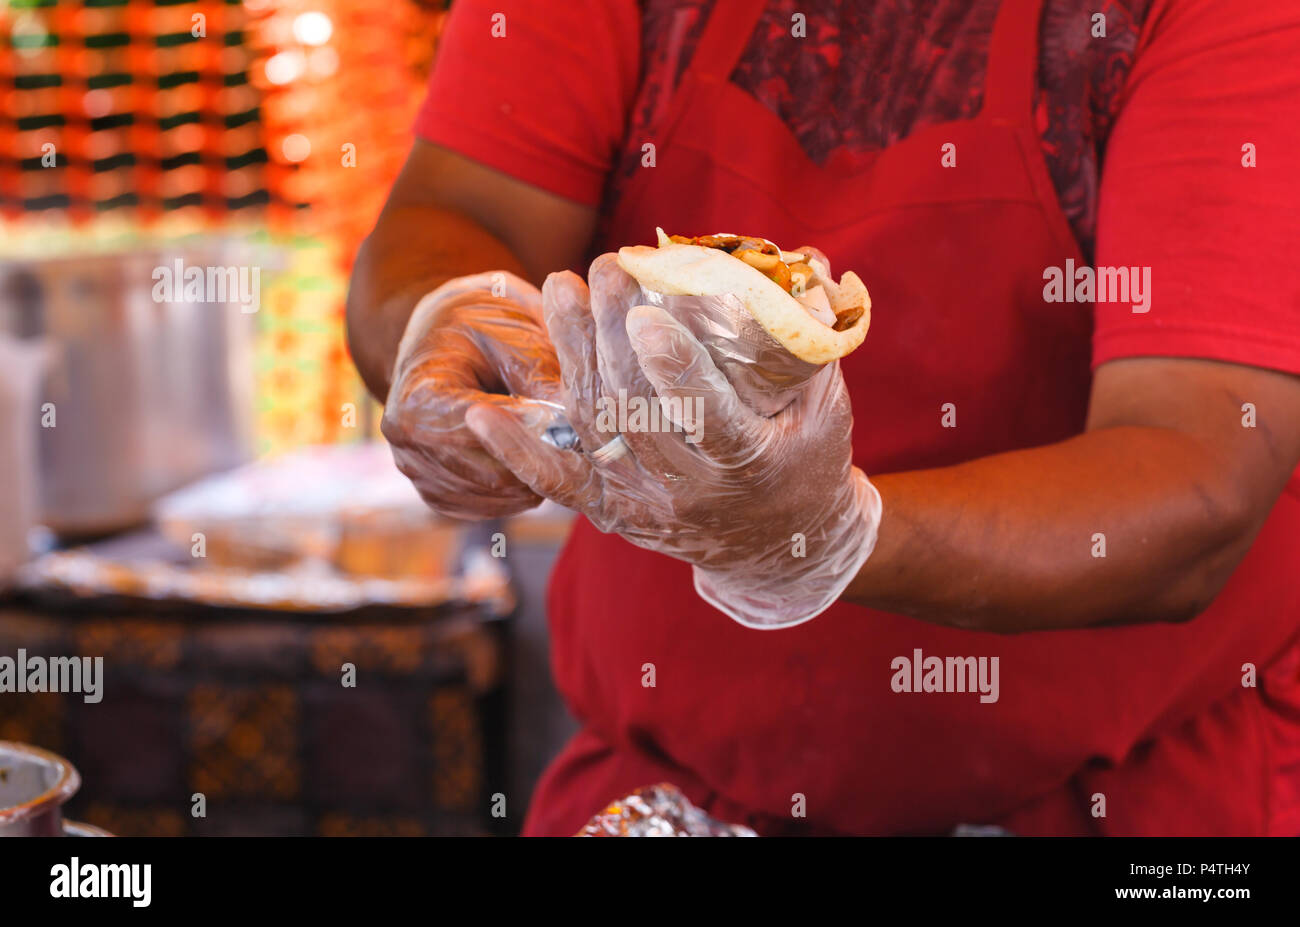 Man serving a gyro at an outdoor food event Stock Photo